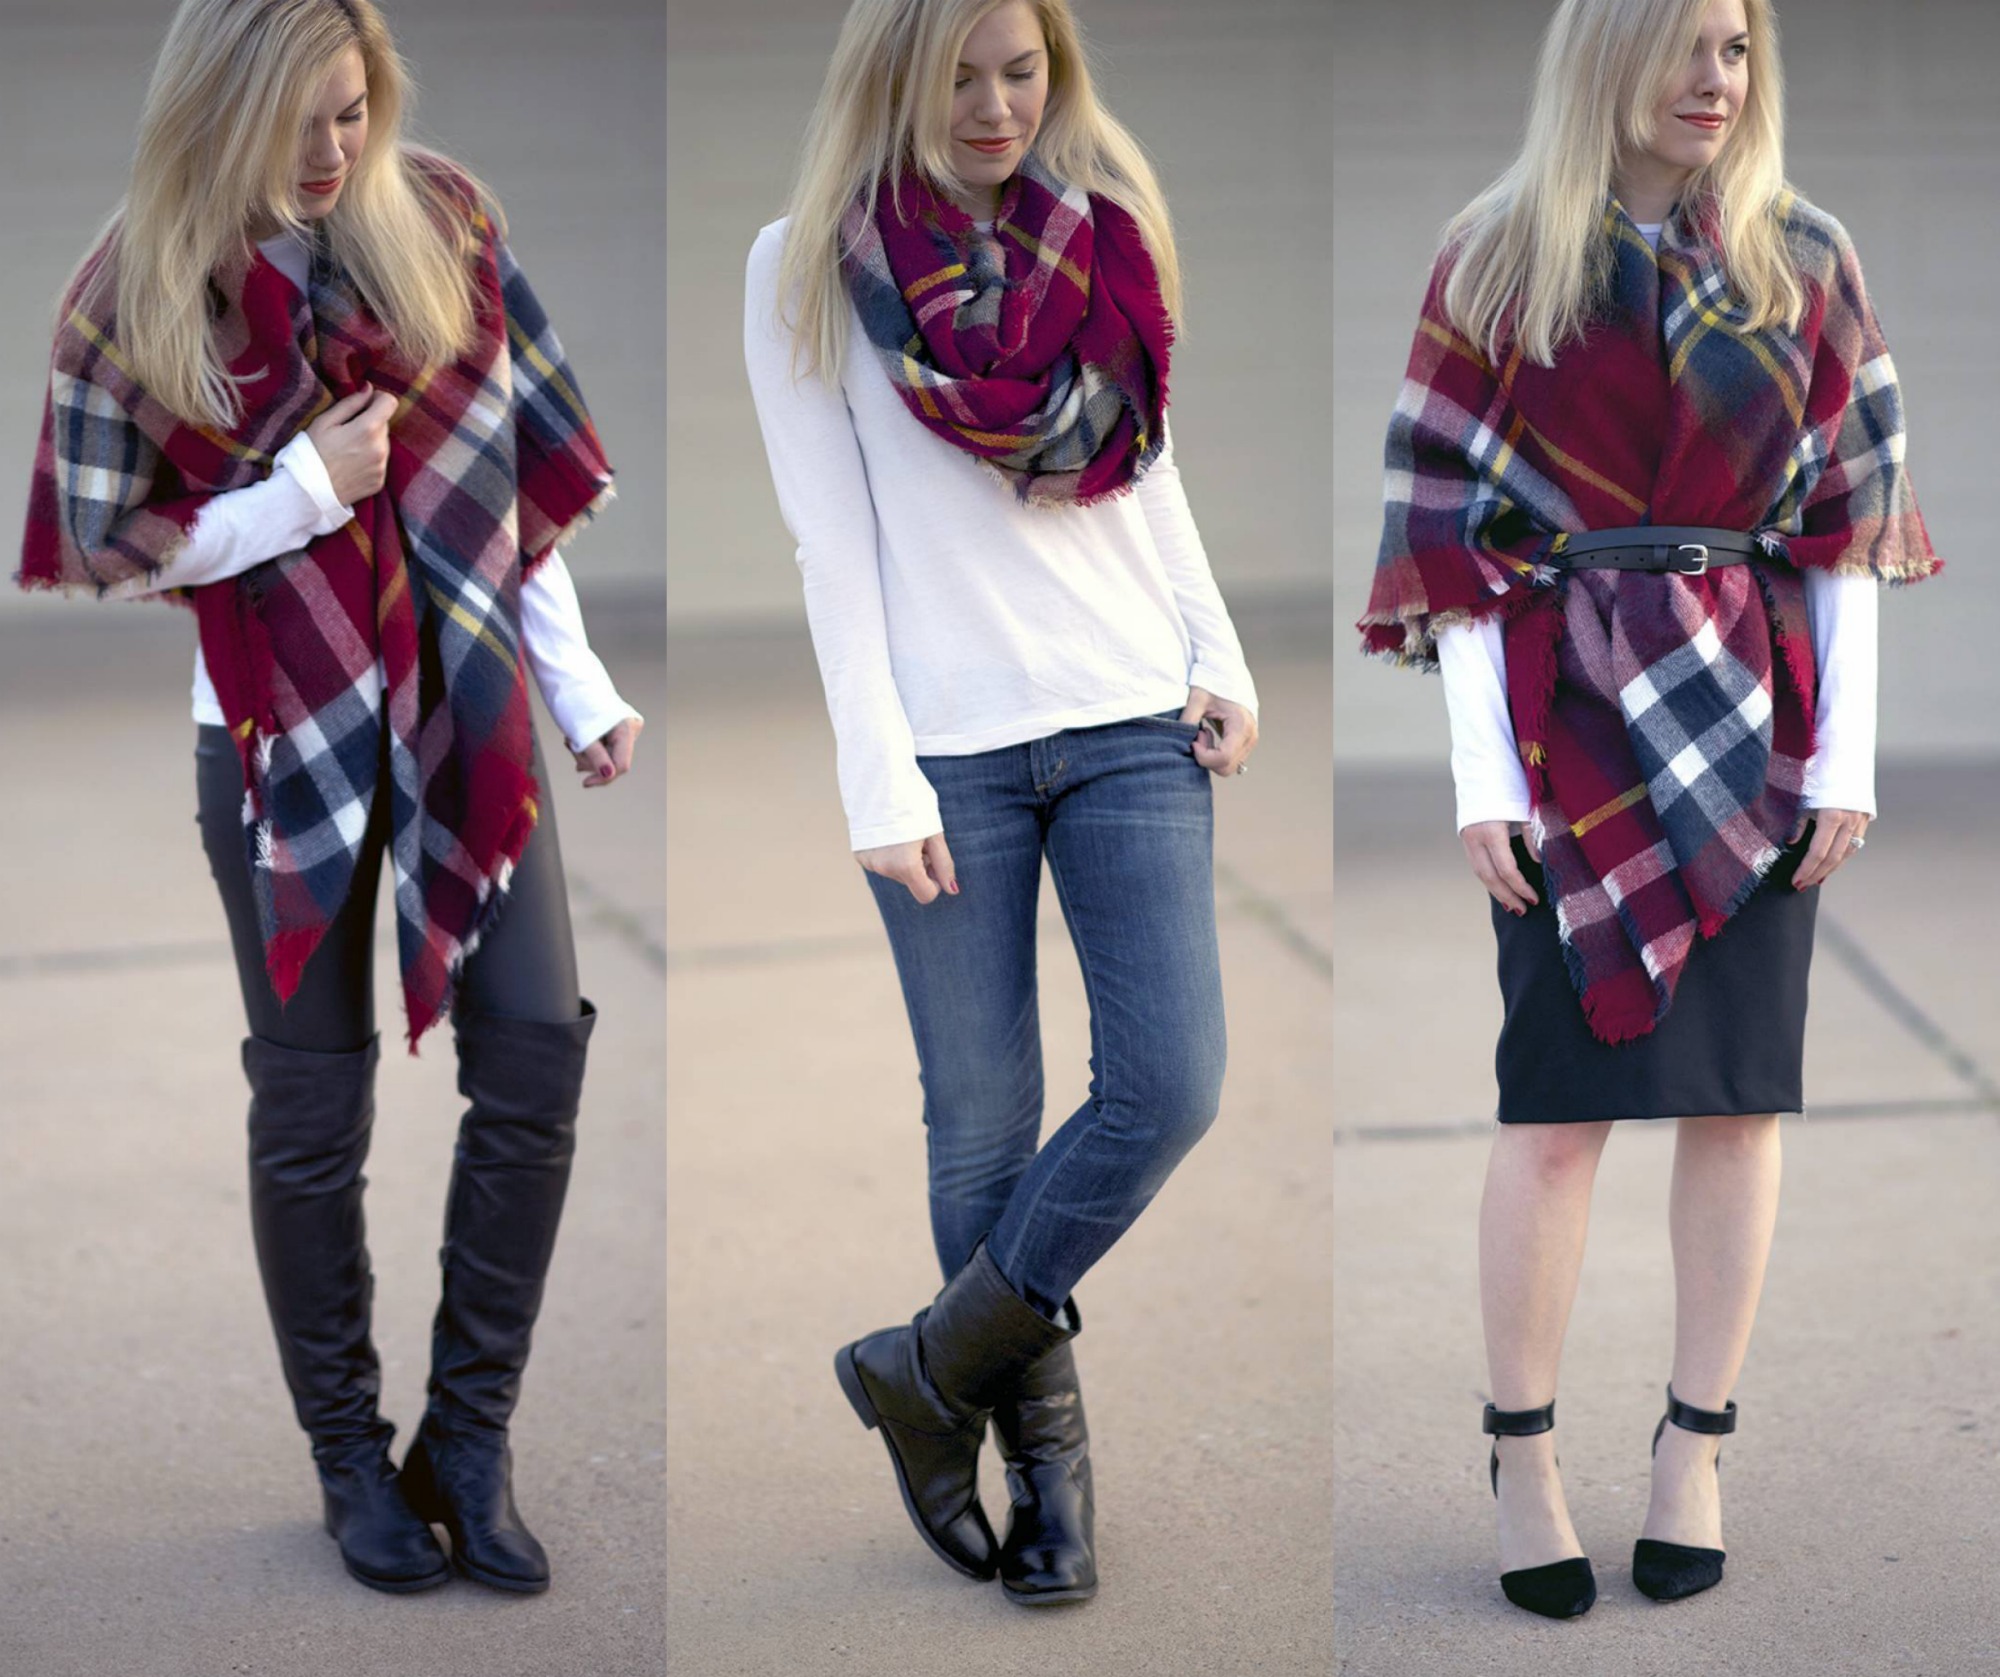 How to style a plaid blanket scarf